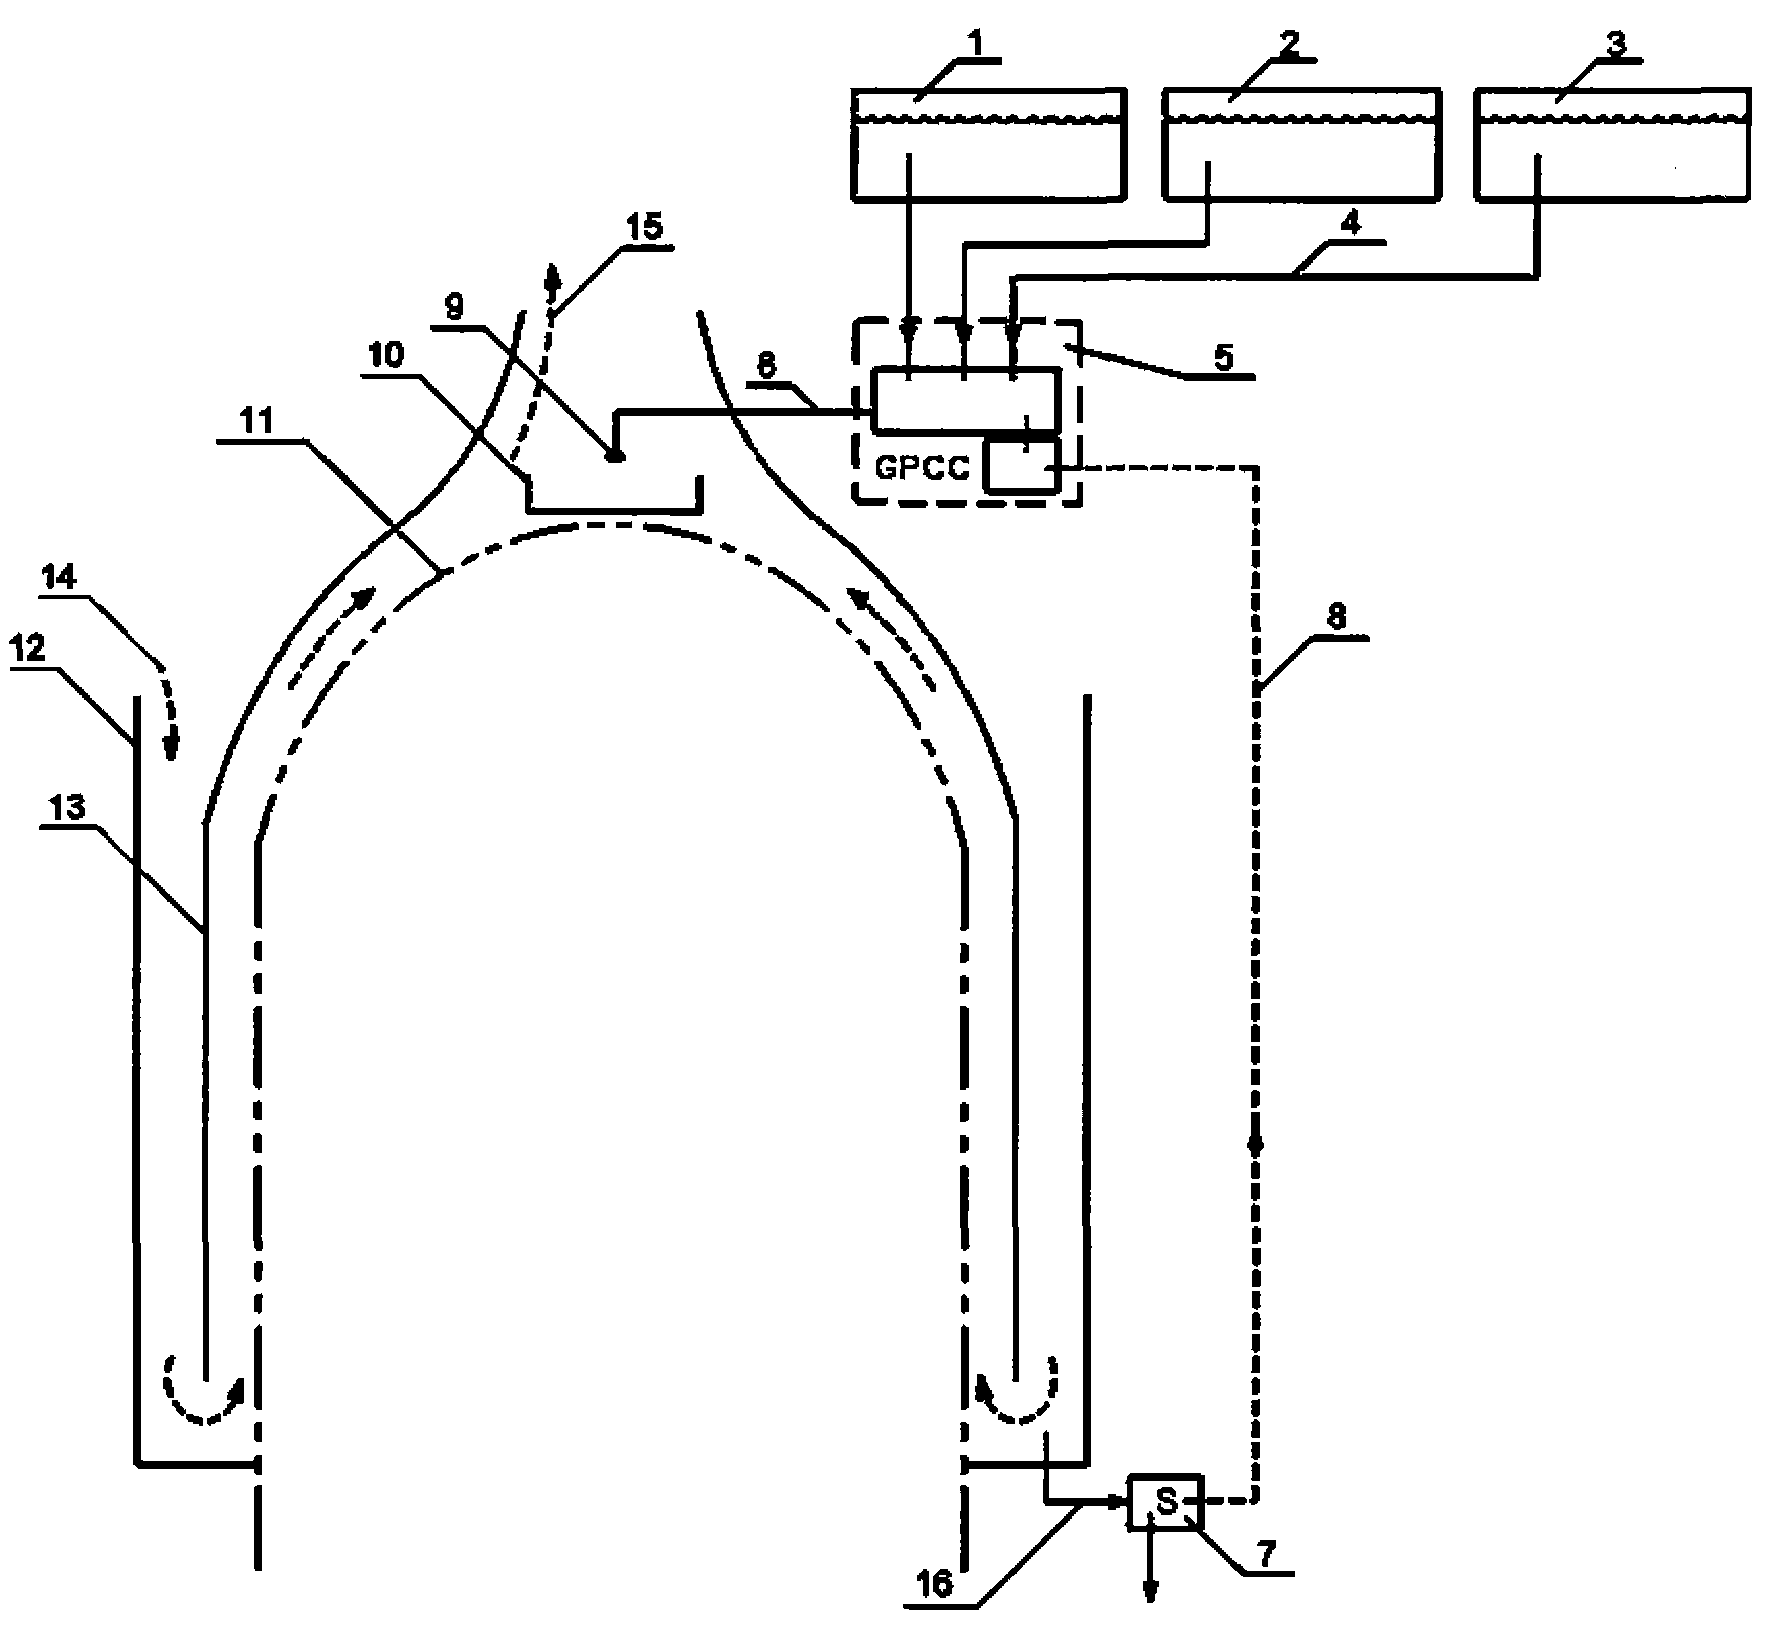 High-capacity and fully passive containment cooling system